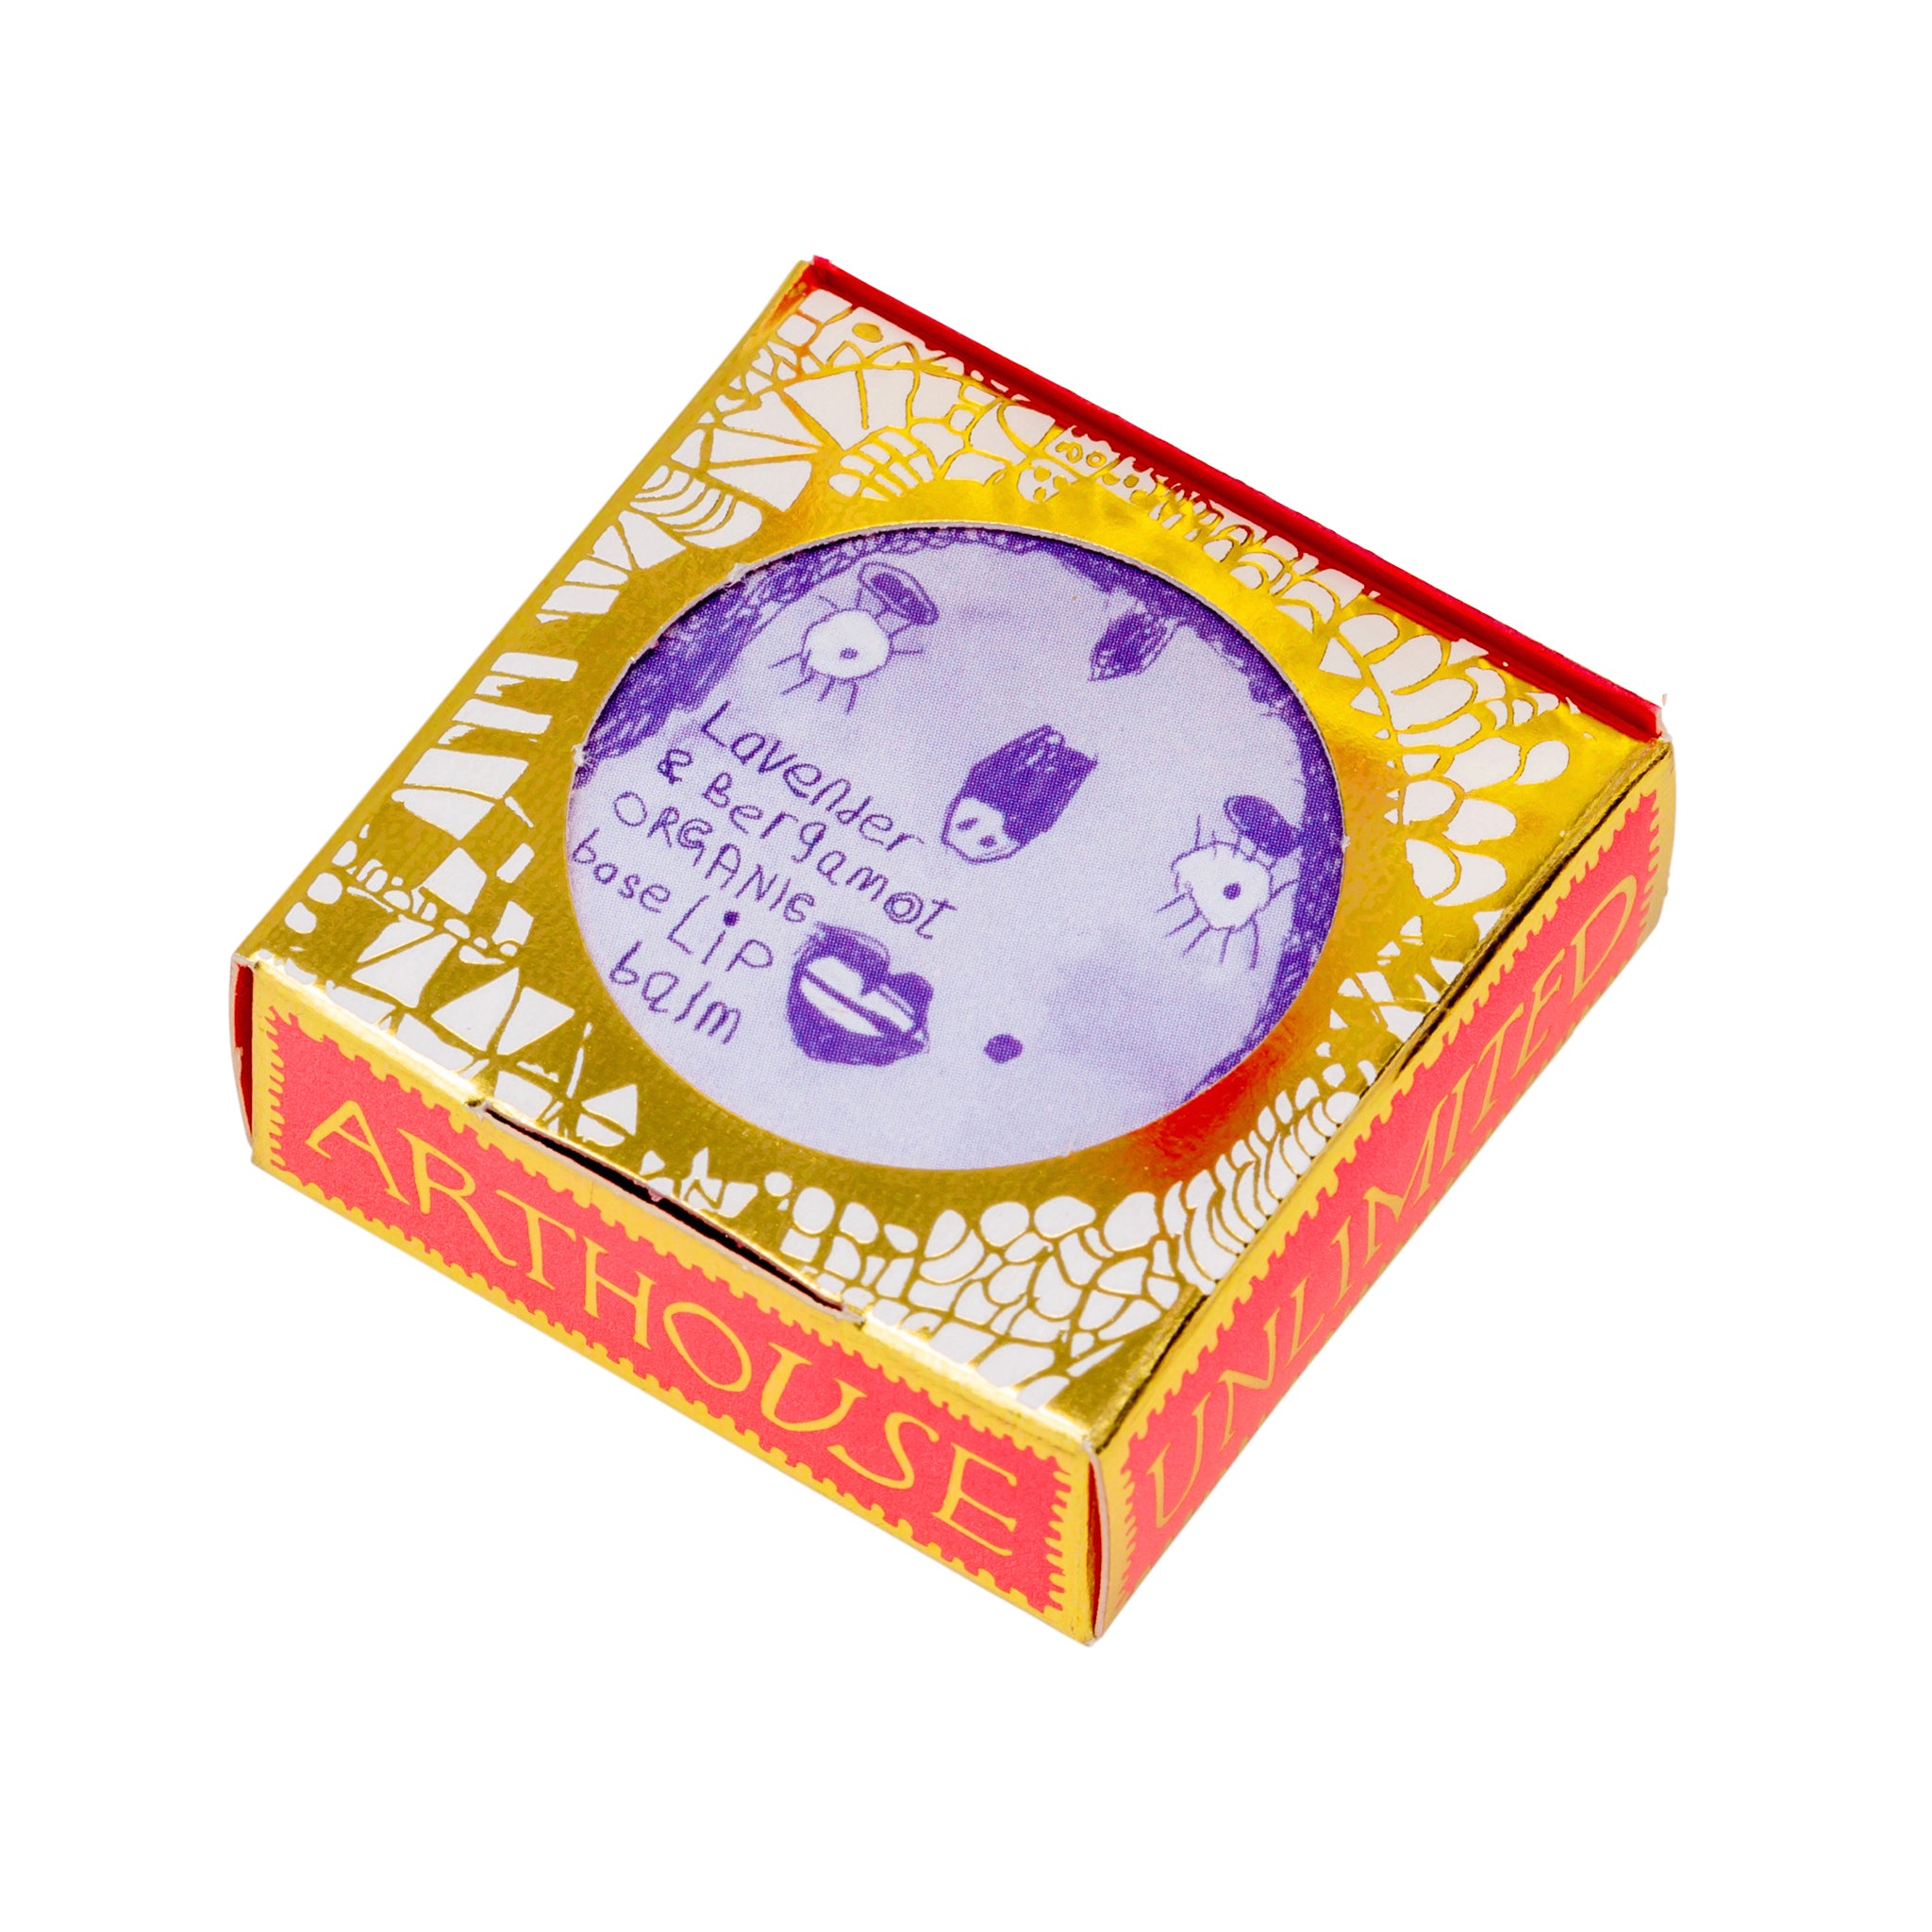 Pink and gold box containing Lady Muck, Lip Balm, Lavender & Bergamot